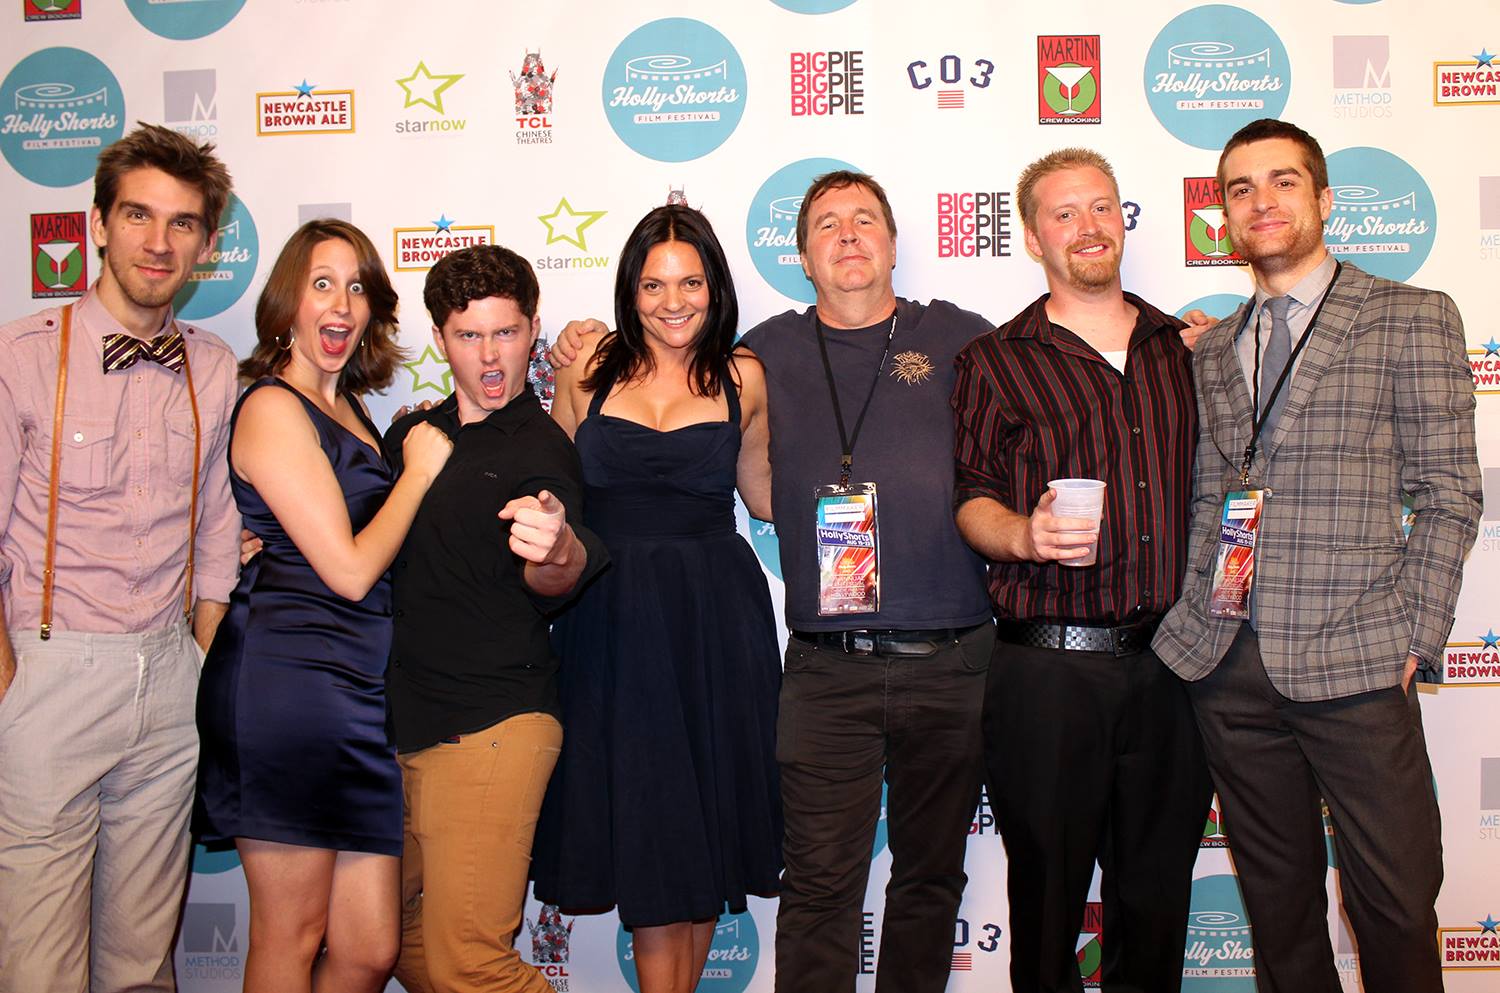 Left to Right; Conner Marx, Beth Meberg, Connor Hair, Ladora Sella, Scot Robinson, Fred Beahm, and Lautaro Gabriel Gonda at the 2013 Holly Shorts Festival for Brightwood.